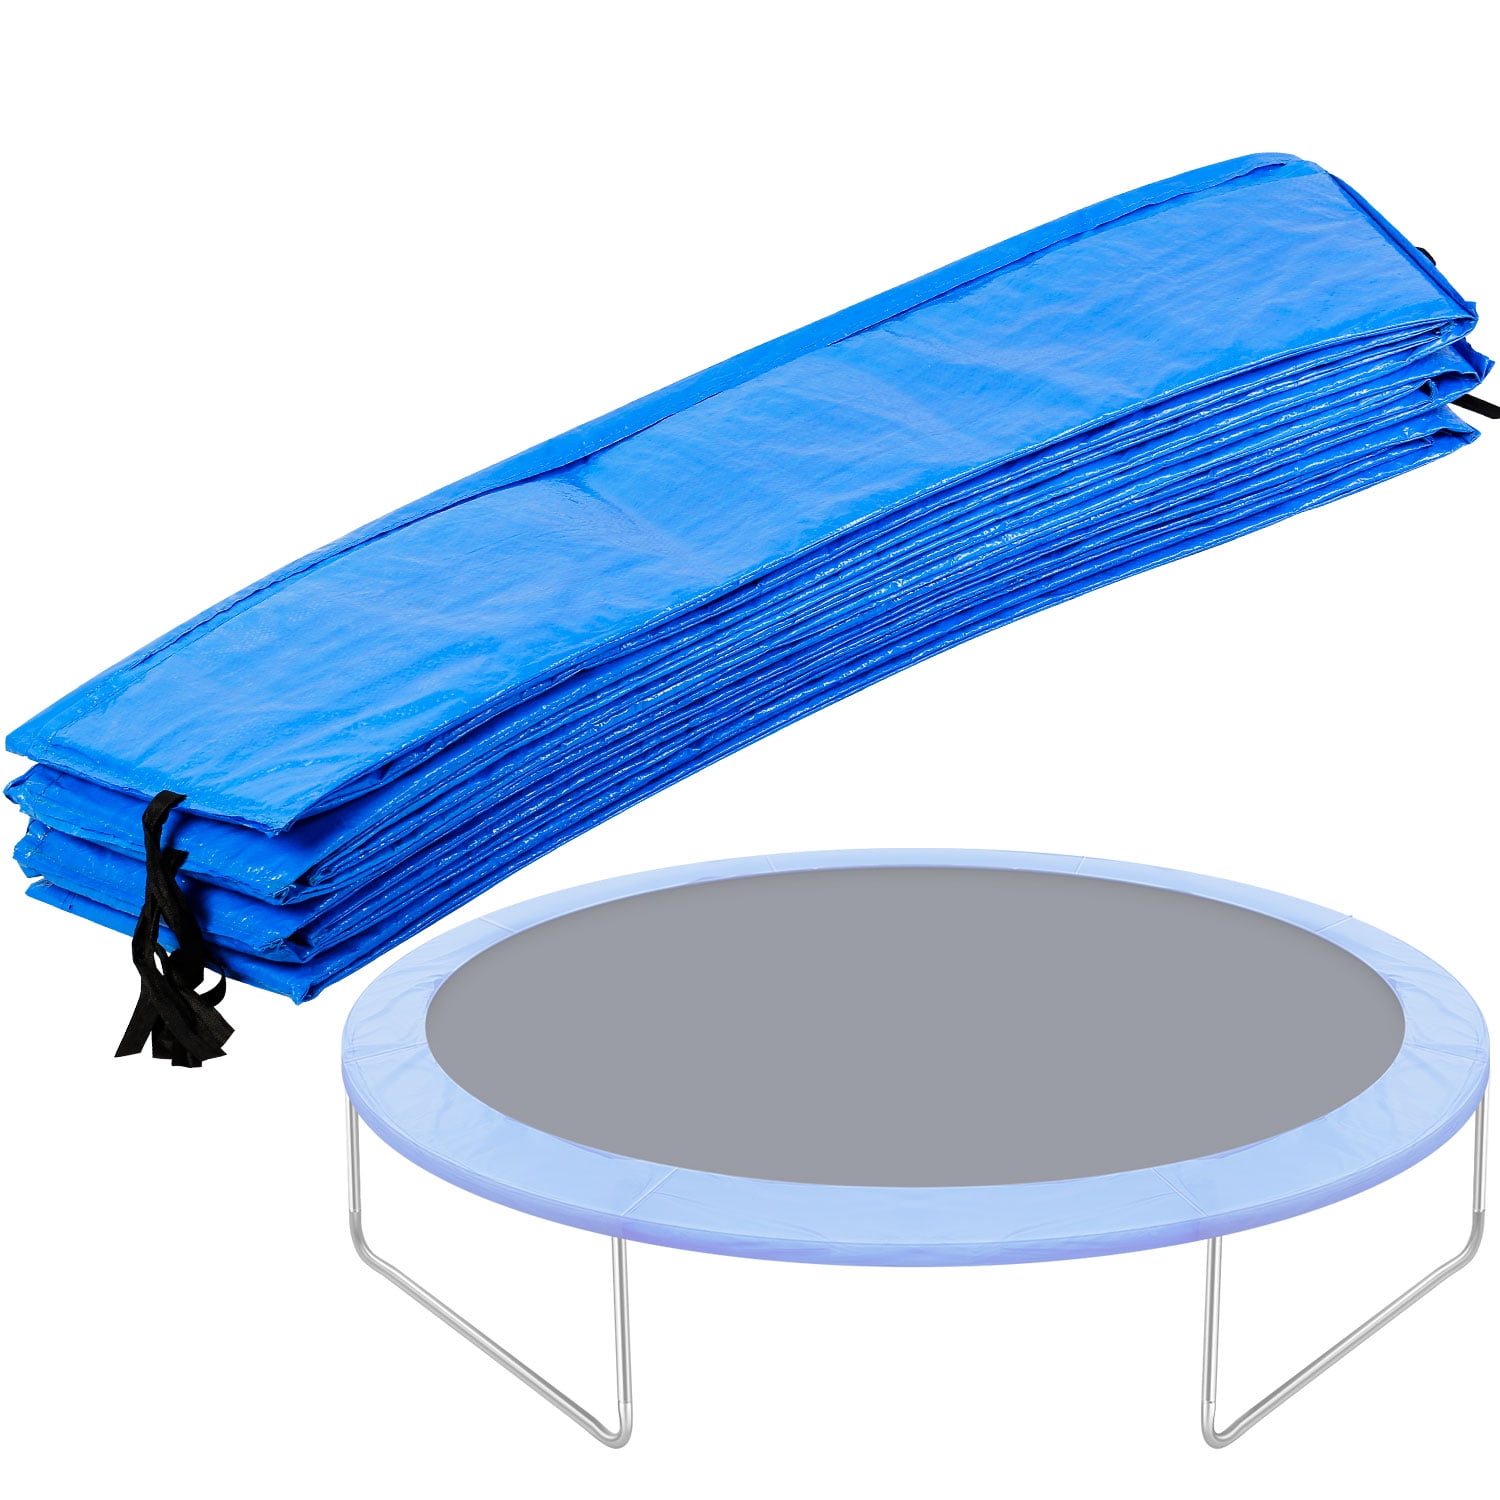 Rainbow, 15ft ANCHEER 15 14 12 10 Ft Replacement Trampoline Surround PVC Pad Foam Safety Spring Cover Padding Pads